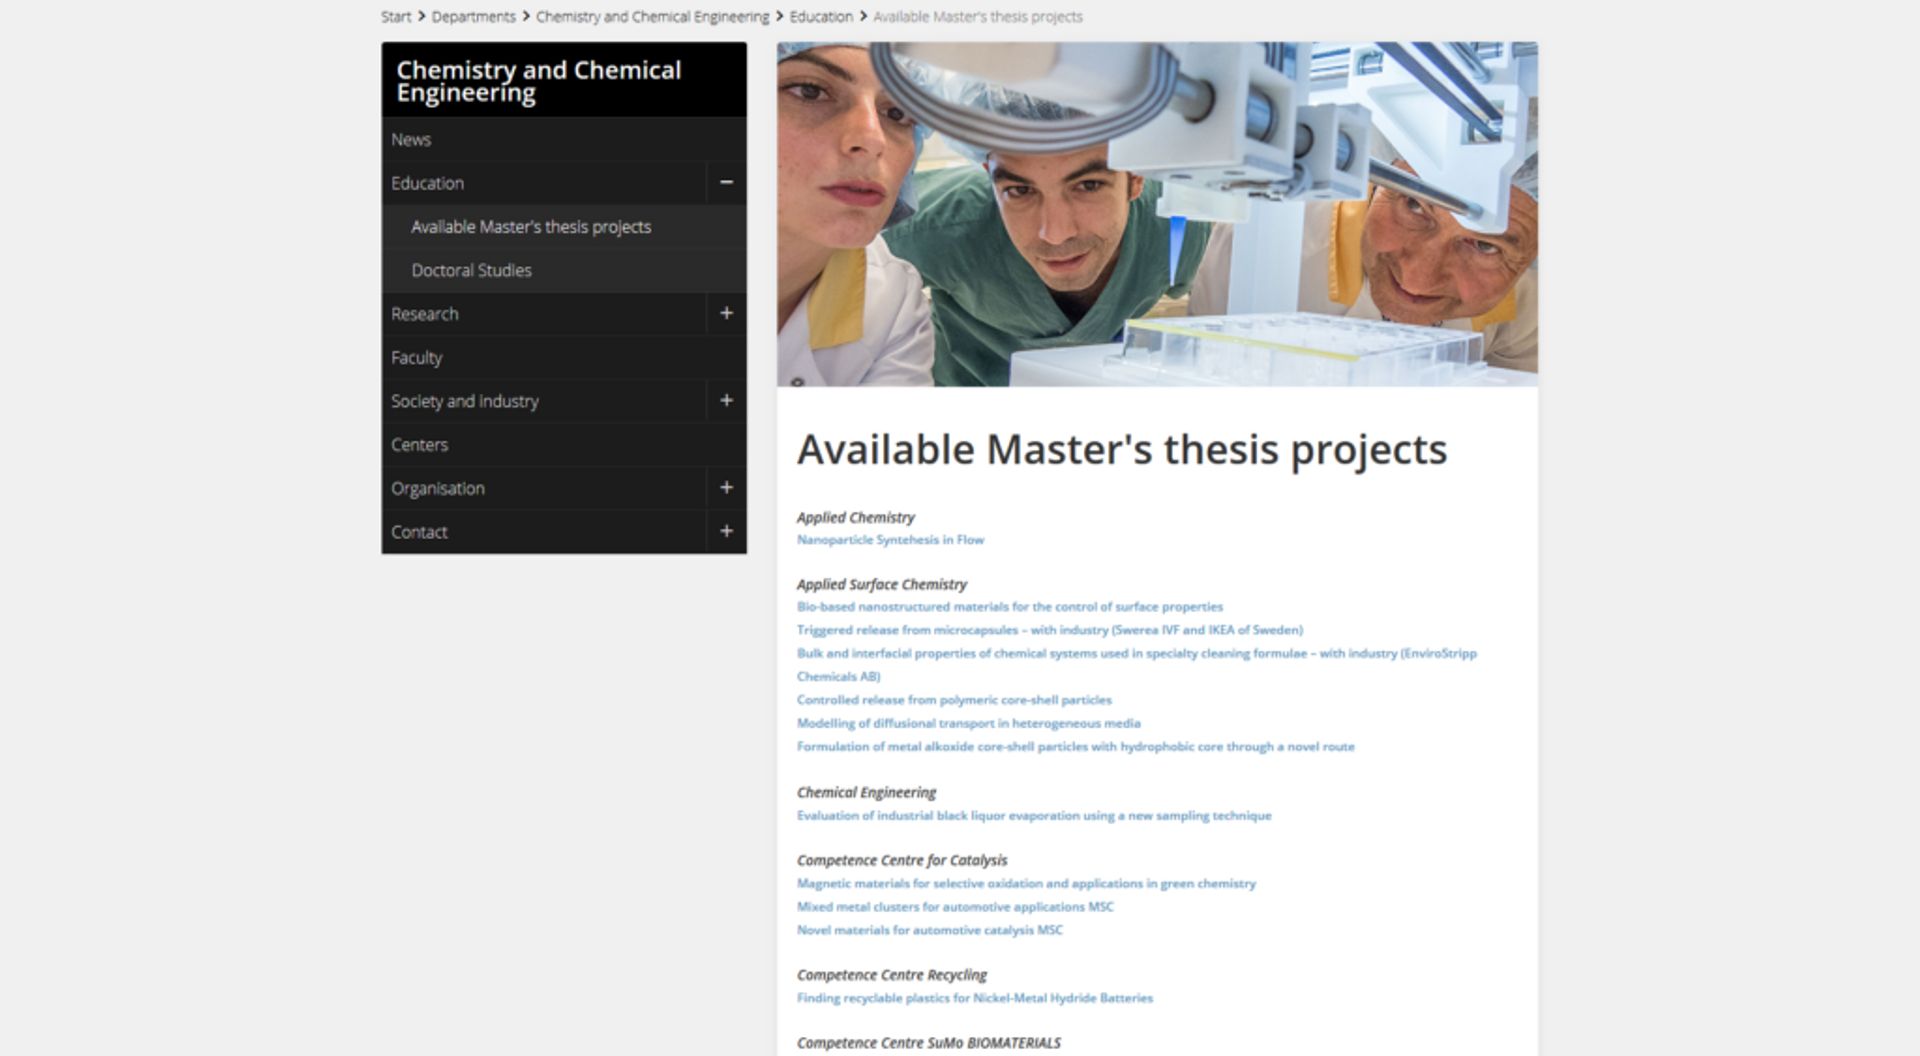 Screenshot of Chalmers website showing available mastter's thesis projects.